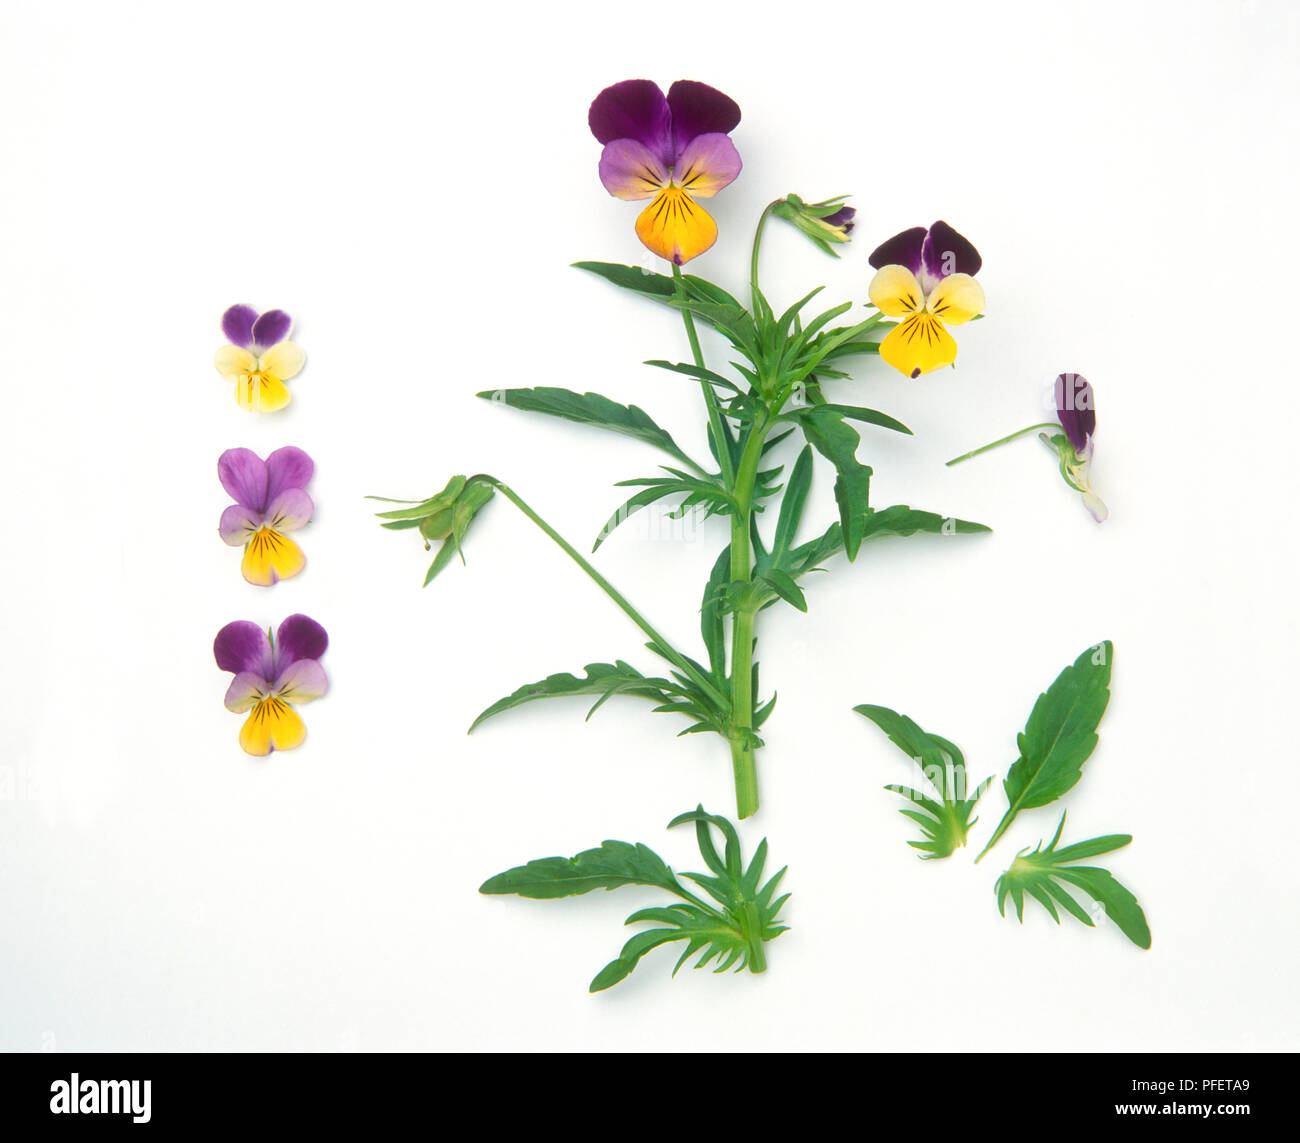 Flowers and leaves from Viola tricolor (Wild pansy) Stock Photo